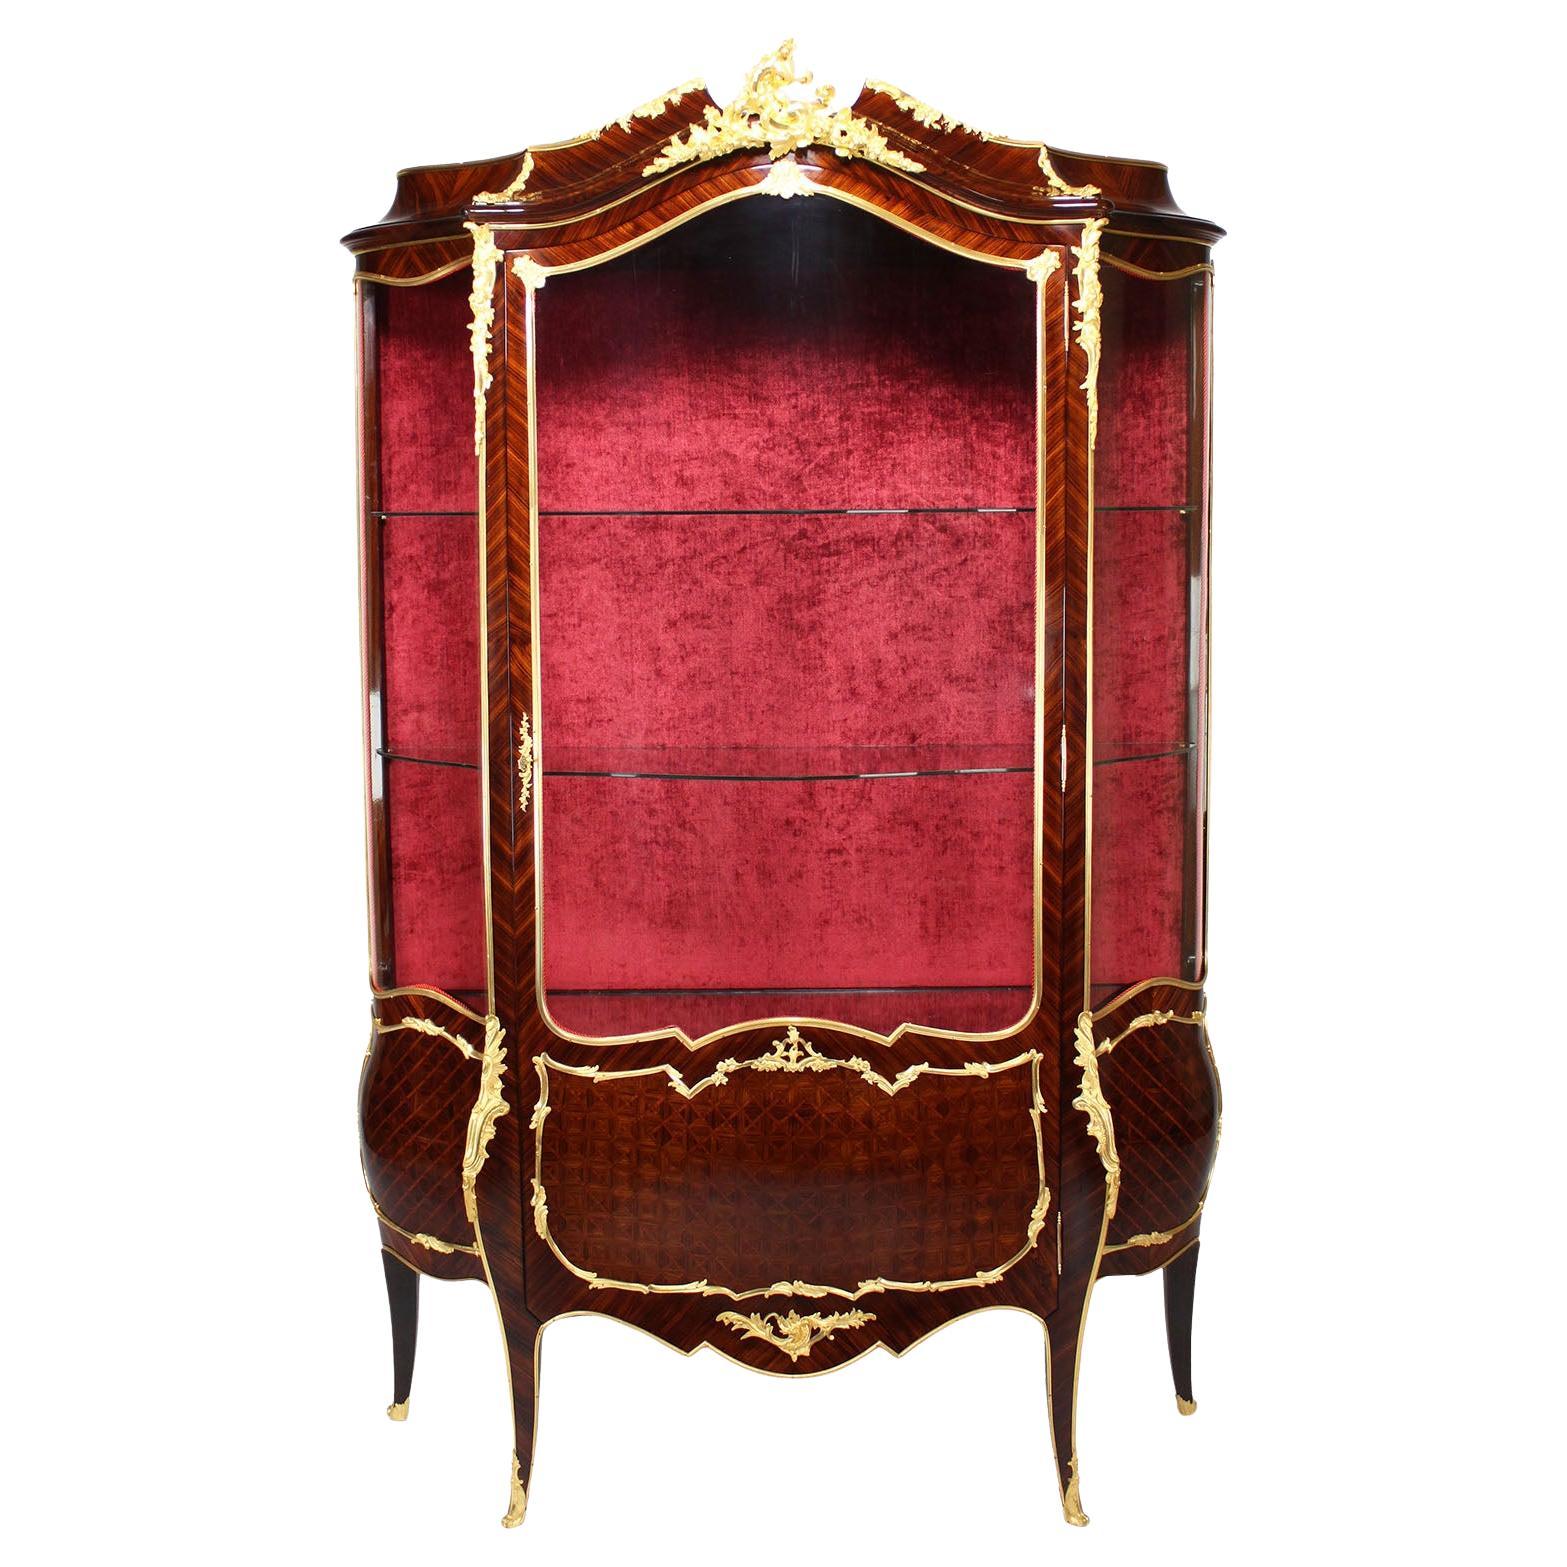 A French Louis XV Style Belle Époque Ormolu Mounted Vitrine, by Alexandre Hugnet For Sale